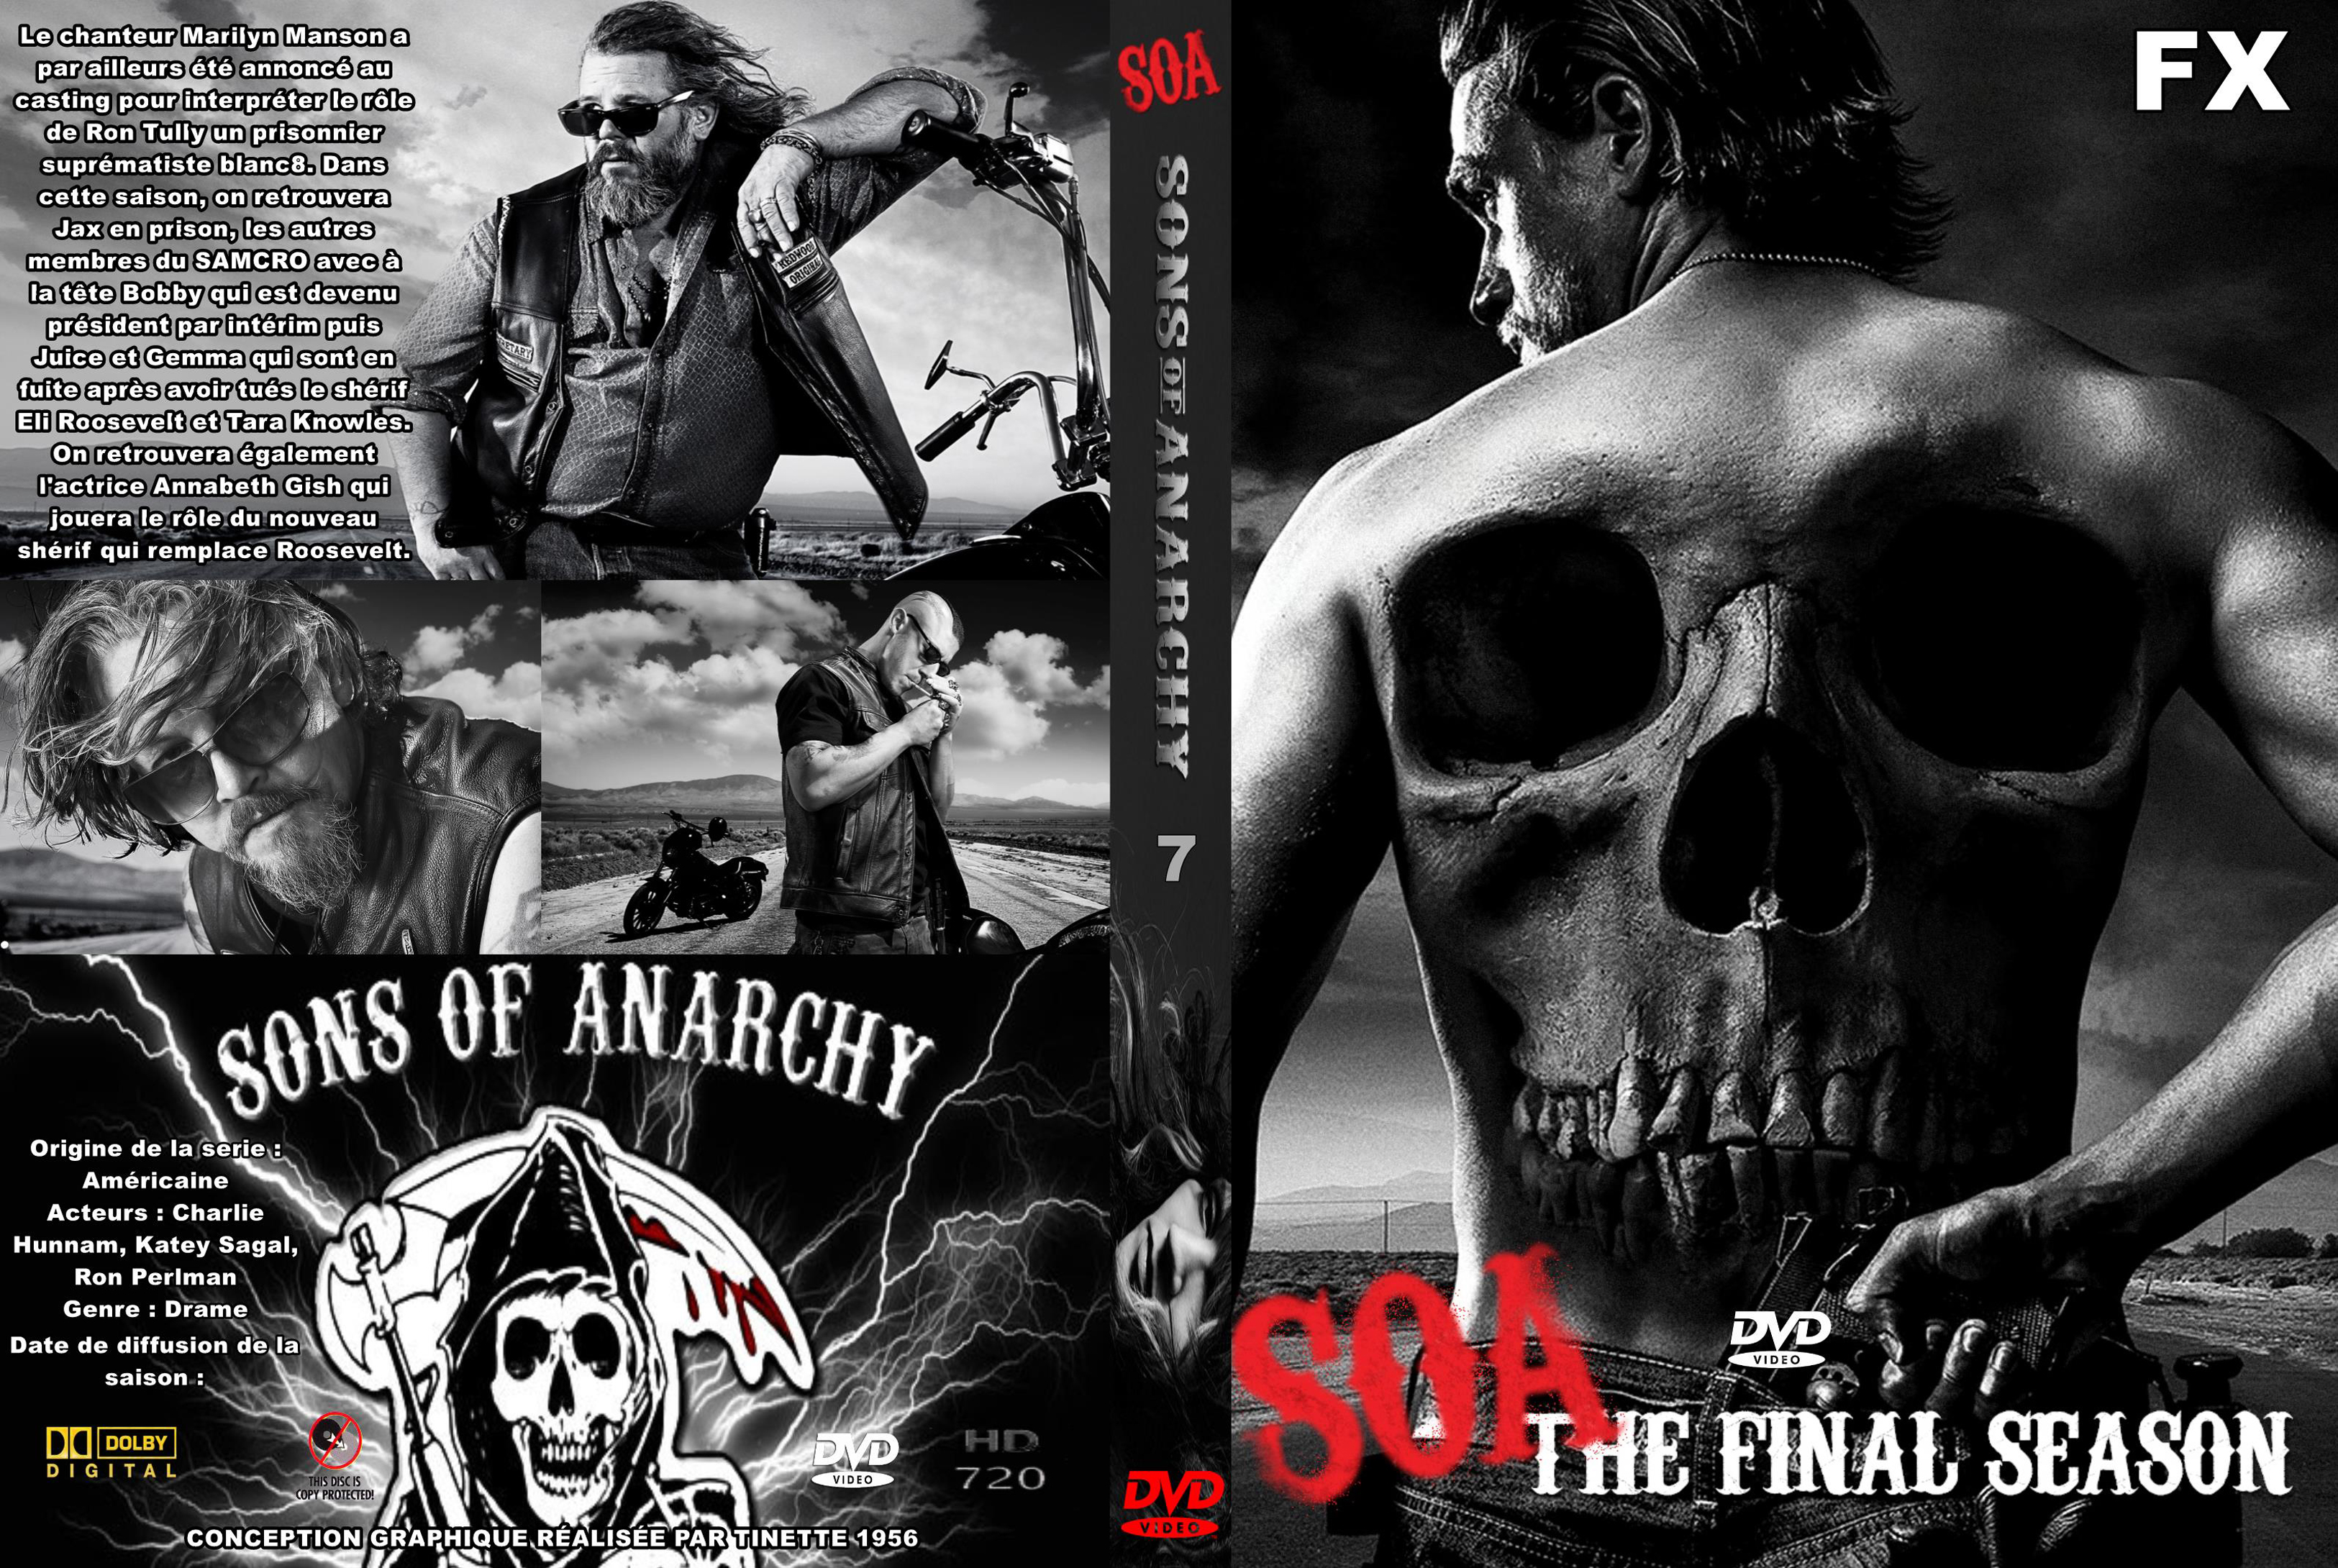 Jaquette DVD Sons of anarchy Saison 7 custom